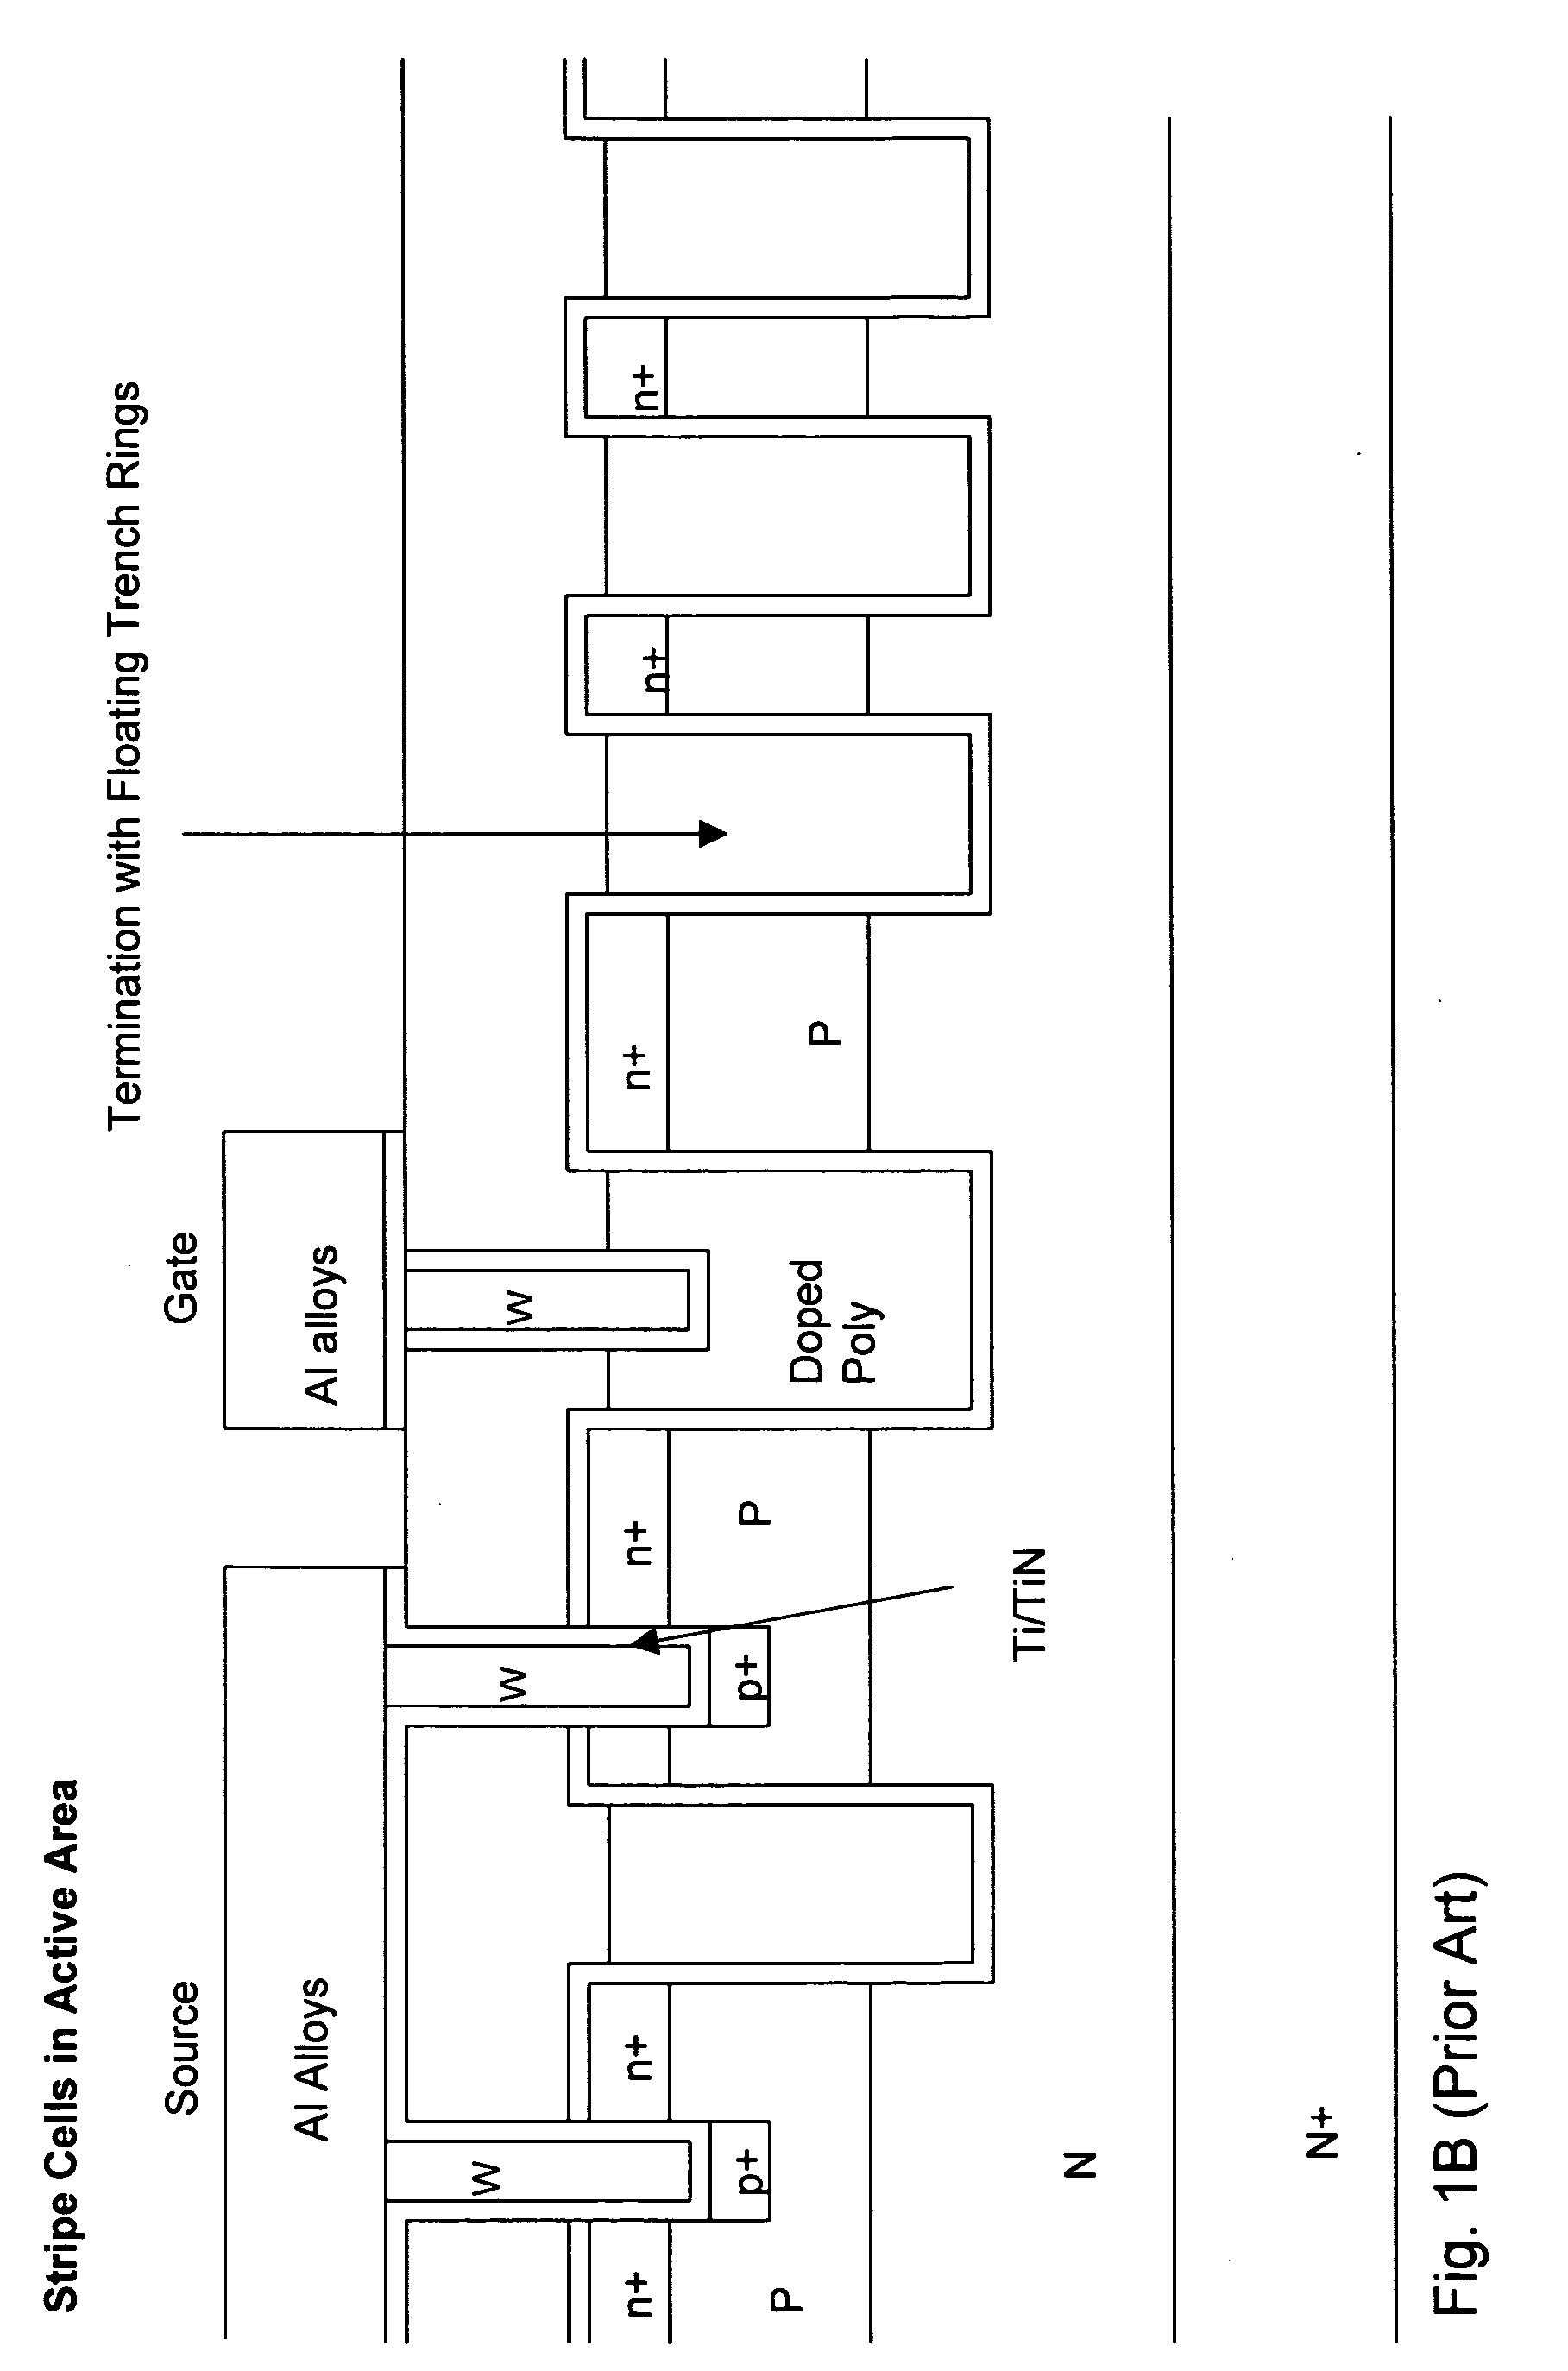 Closed trench MOSFET with floating trench rings as termination